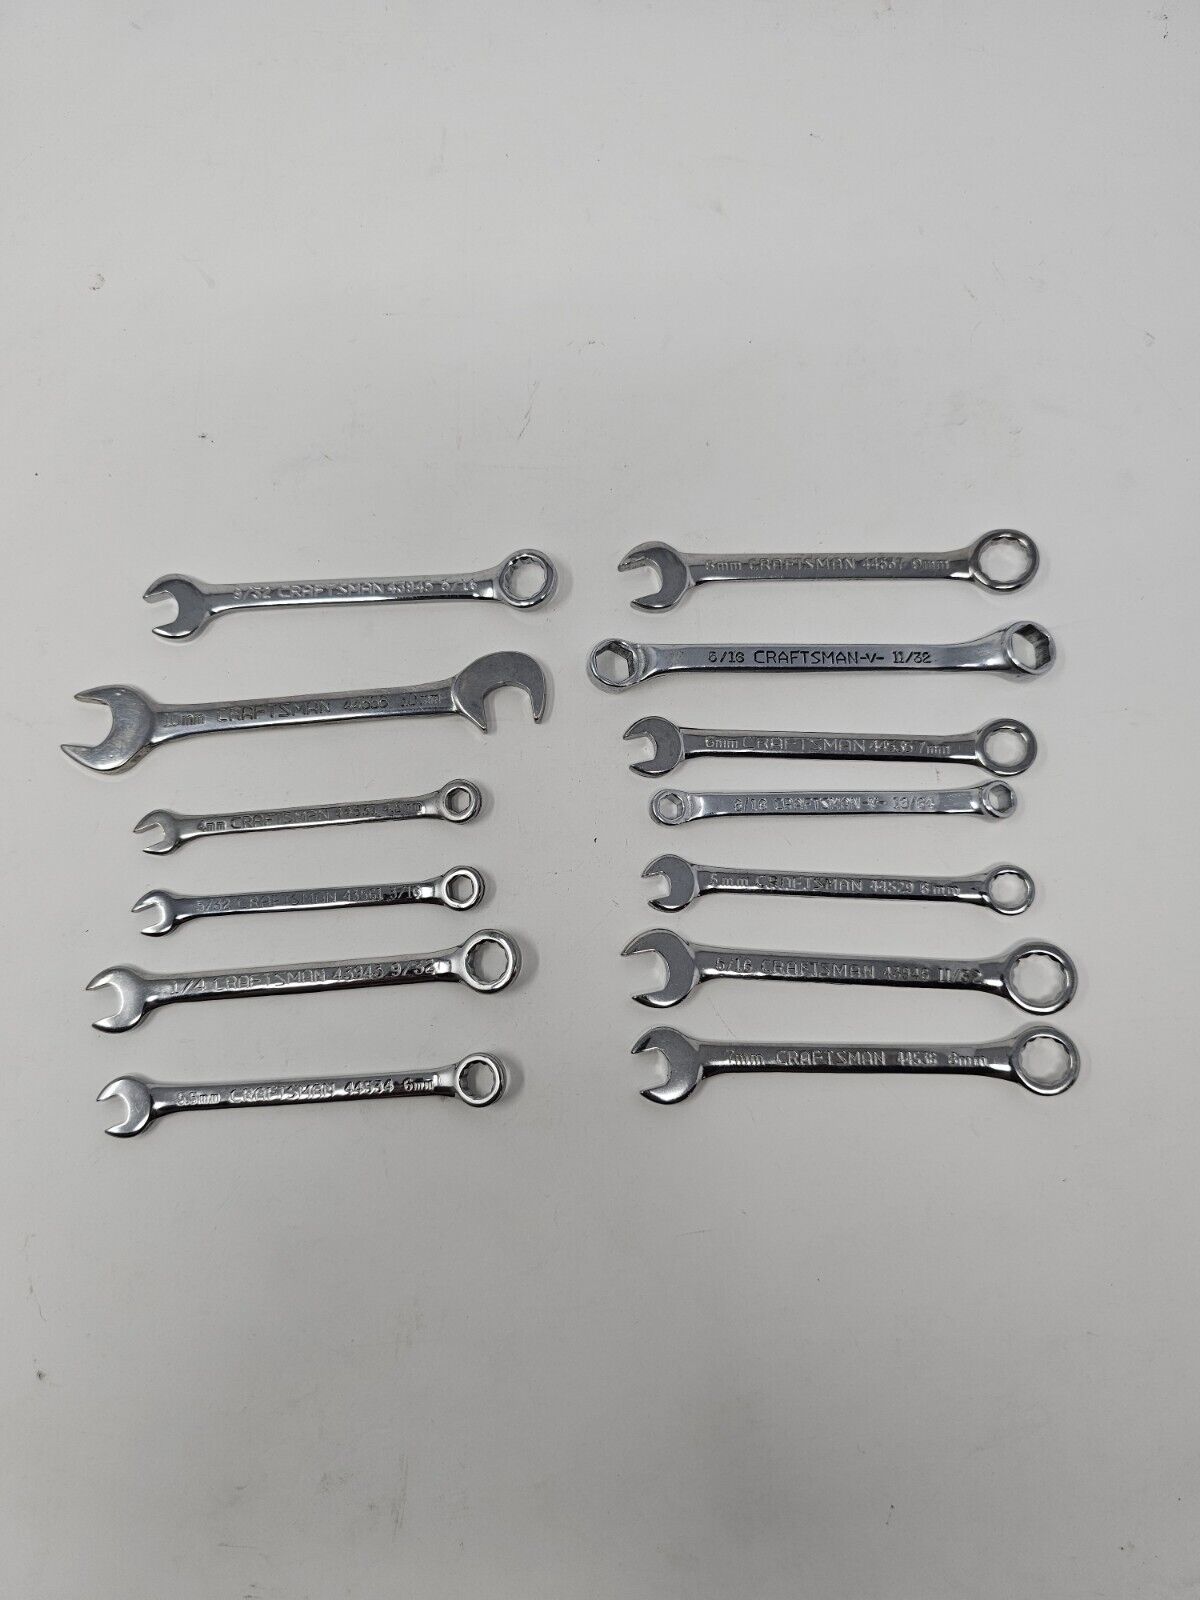 Mixed Lot of 13 Craftsman Open & Combination Wrenches 